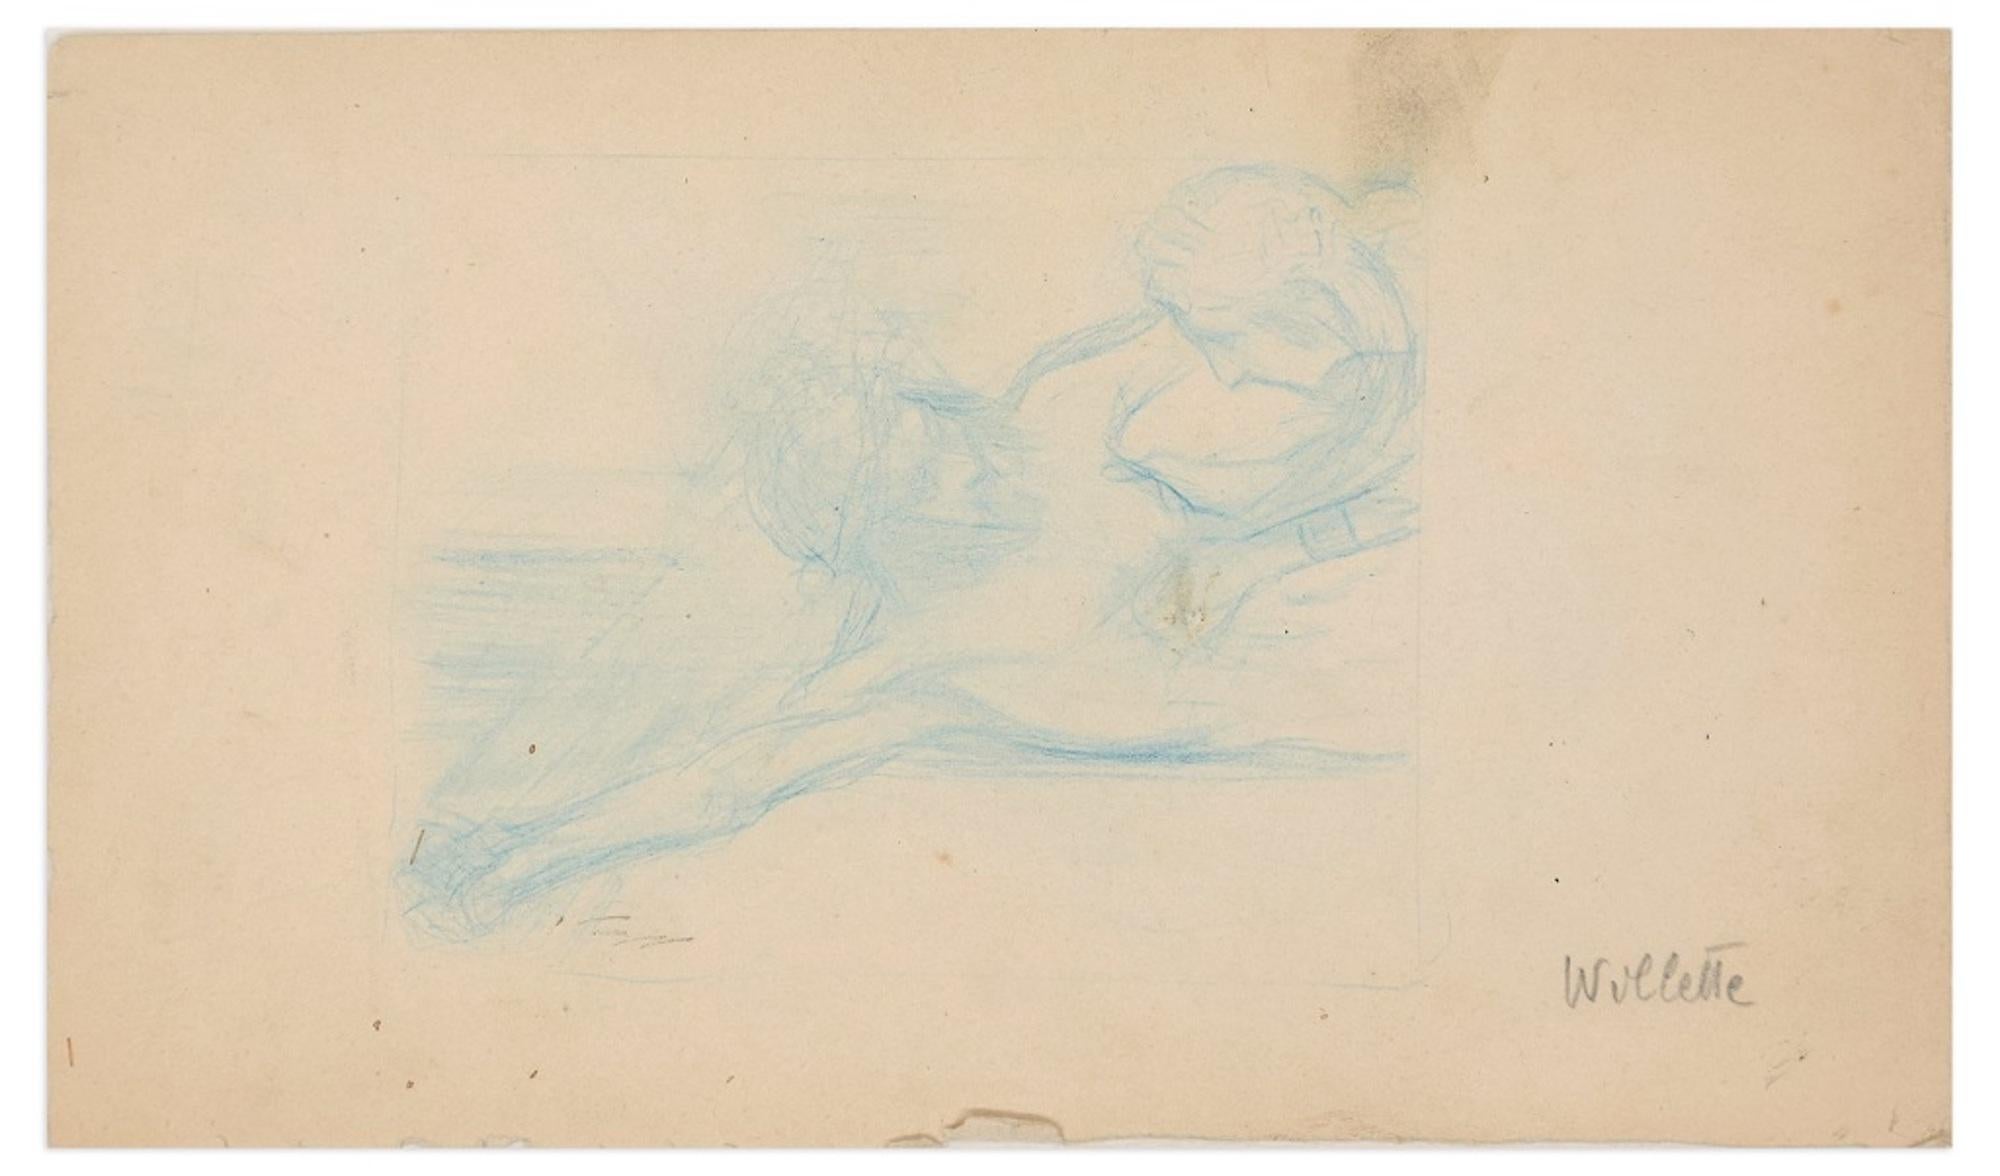 Adolphe Willette  Figurative Art - Study for Crucifix - Original Drawing by A. Willette - End of 19th Century